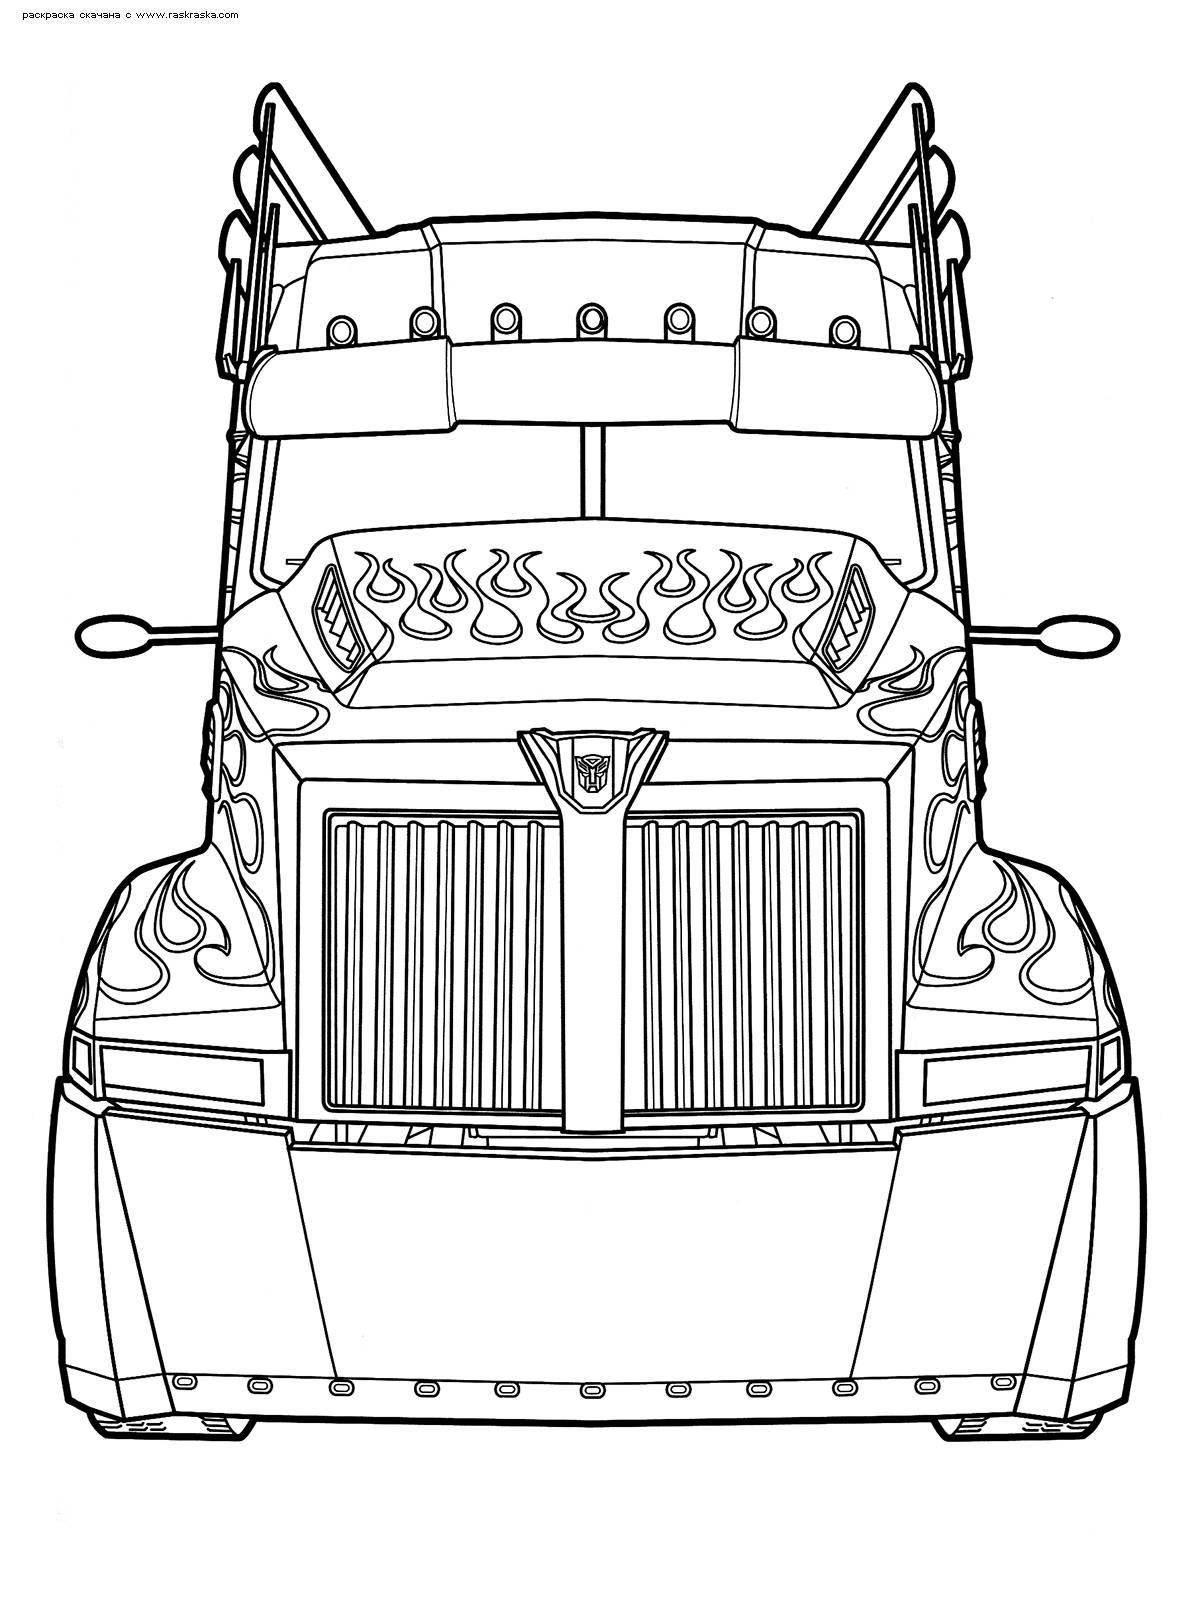 Dazzling cyber truck coloring page